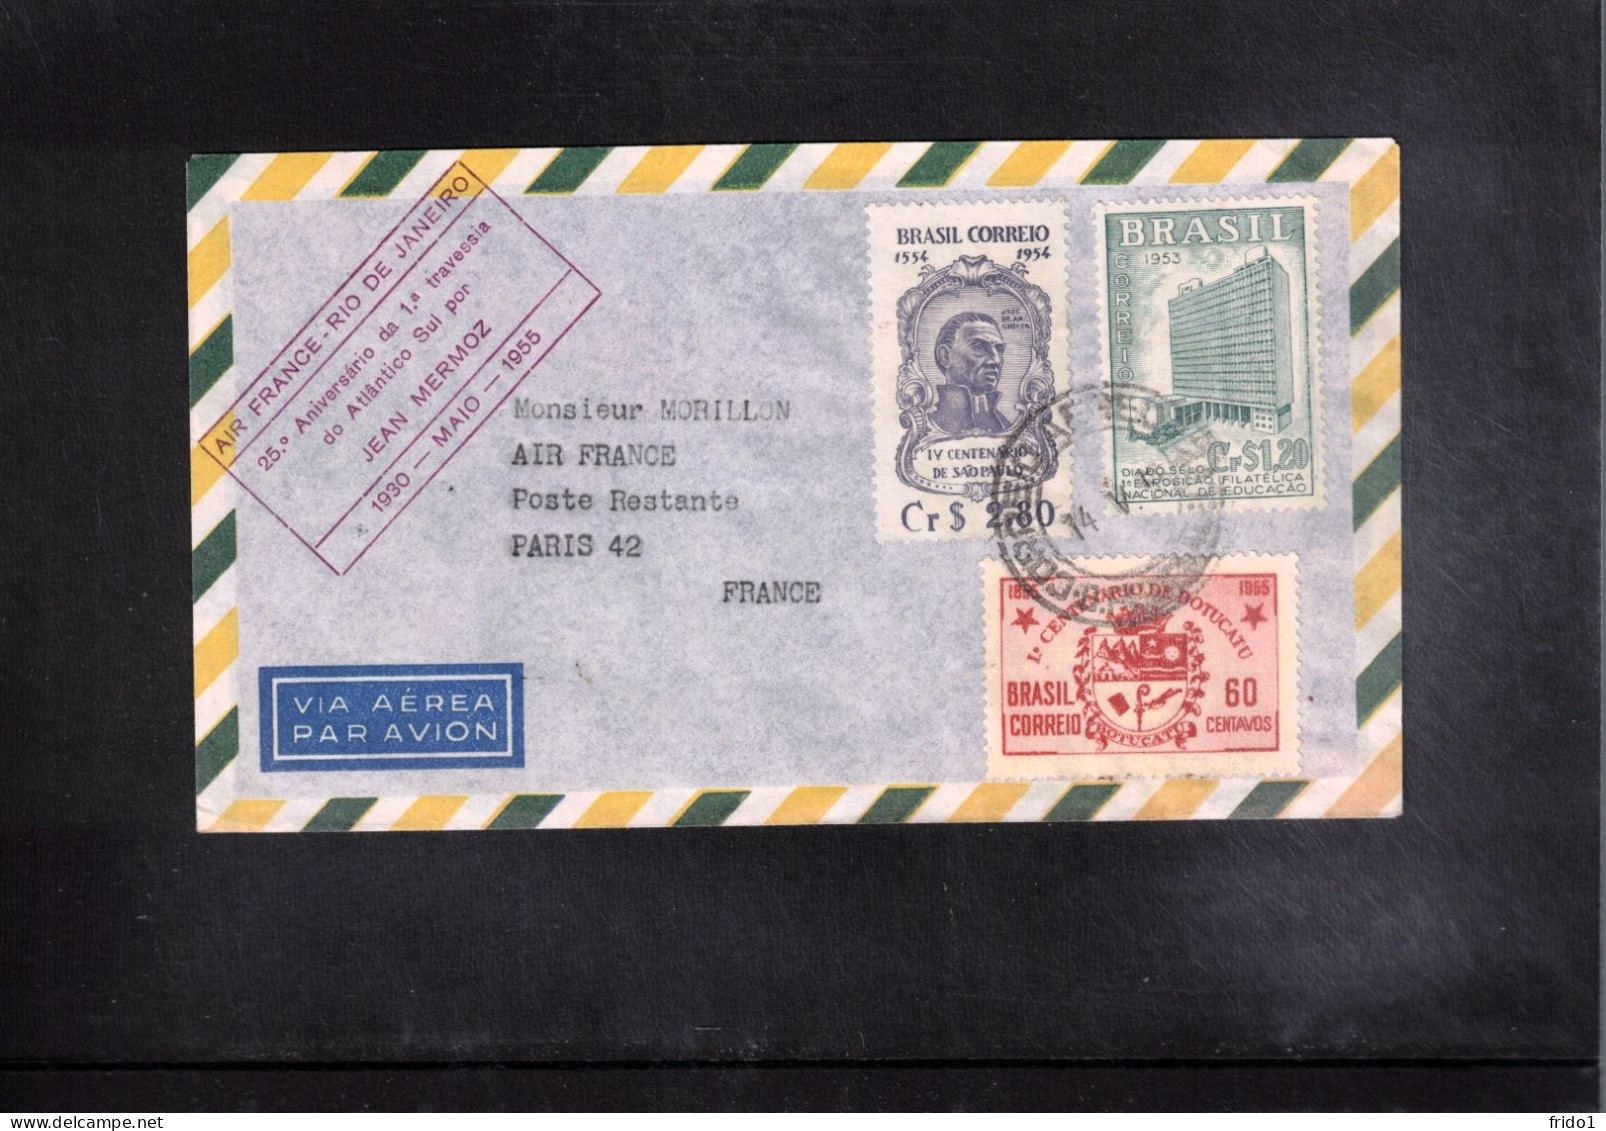 Brazil 1955 25th Anniversary Of The First Crossing Of Atlantic Rio De Janeiro - Paris By Air France Jean Mermoz - Covers & Documents